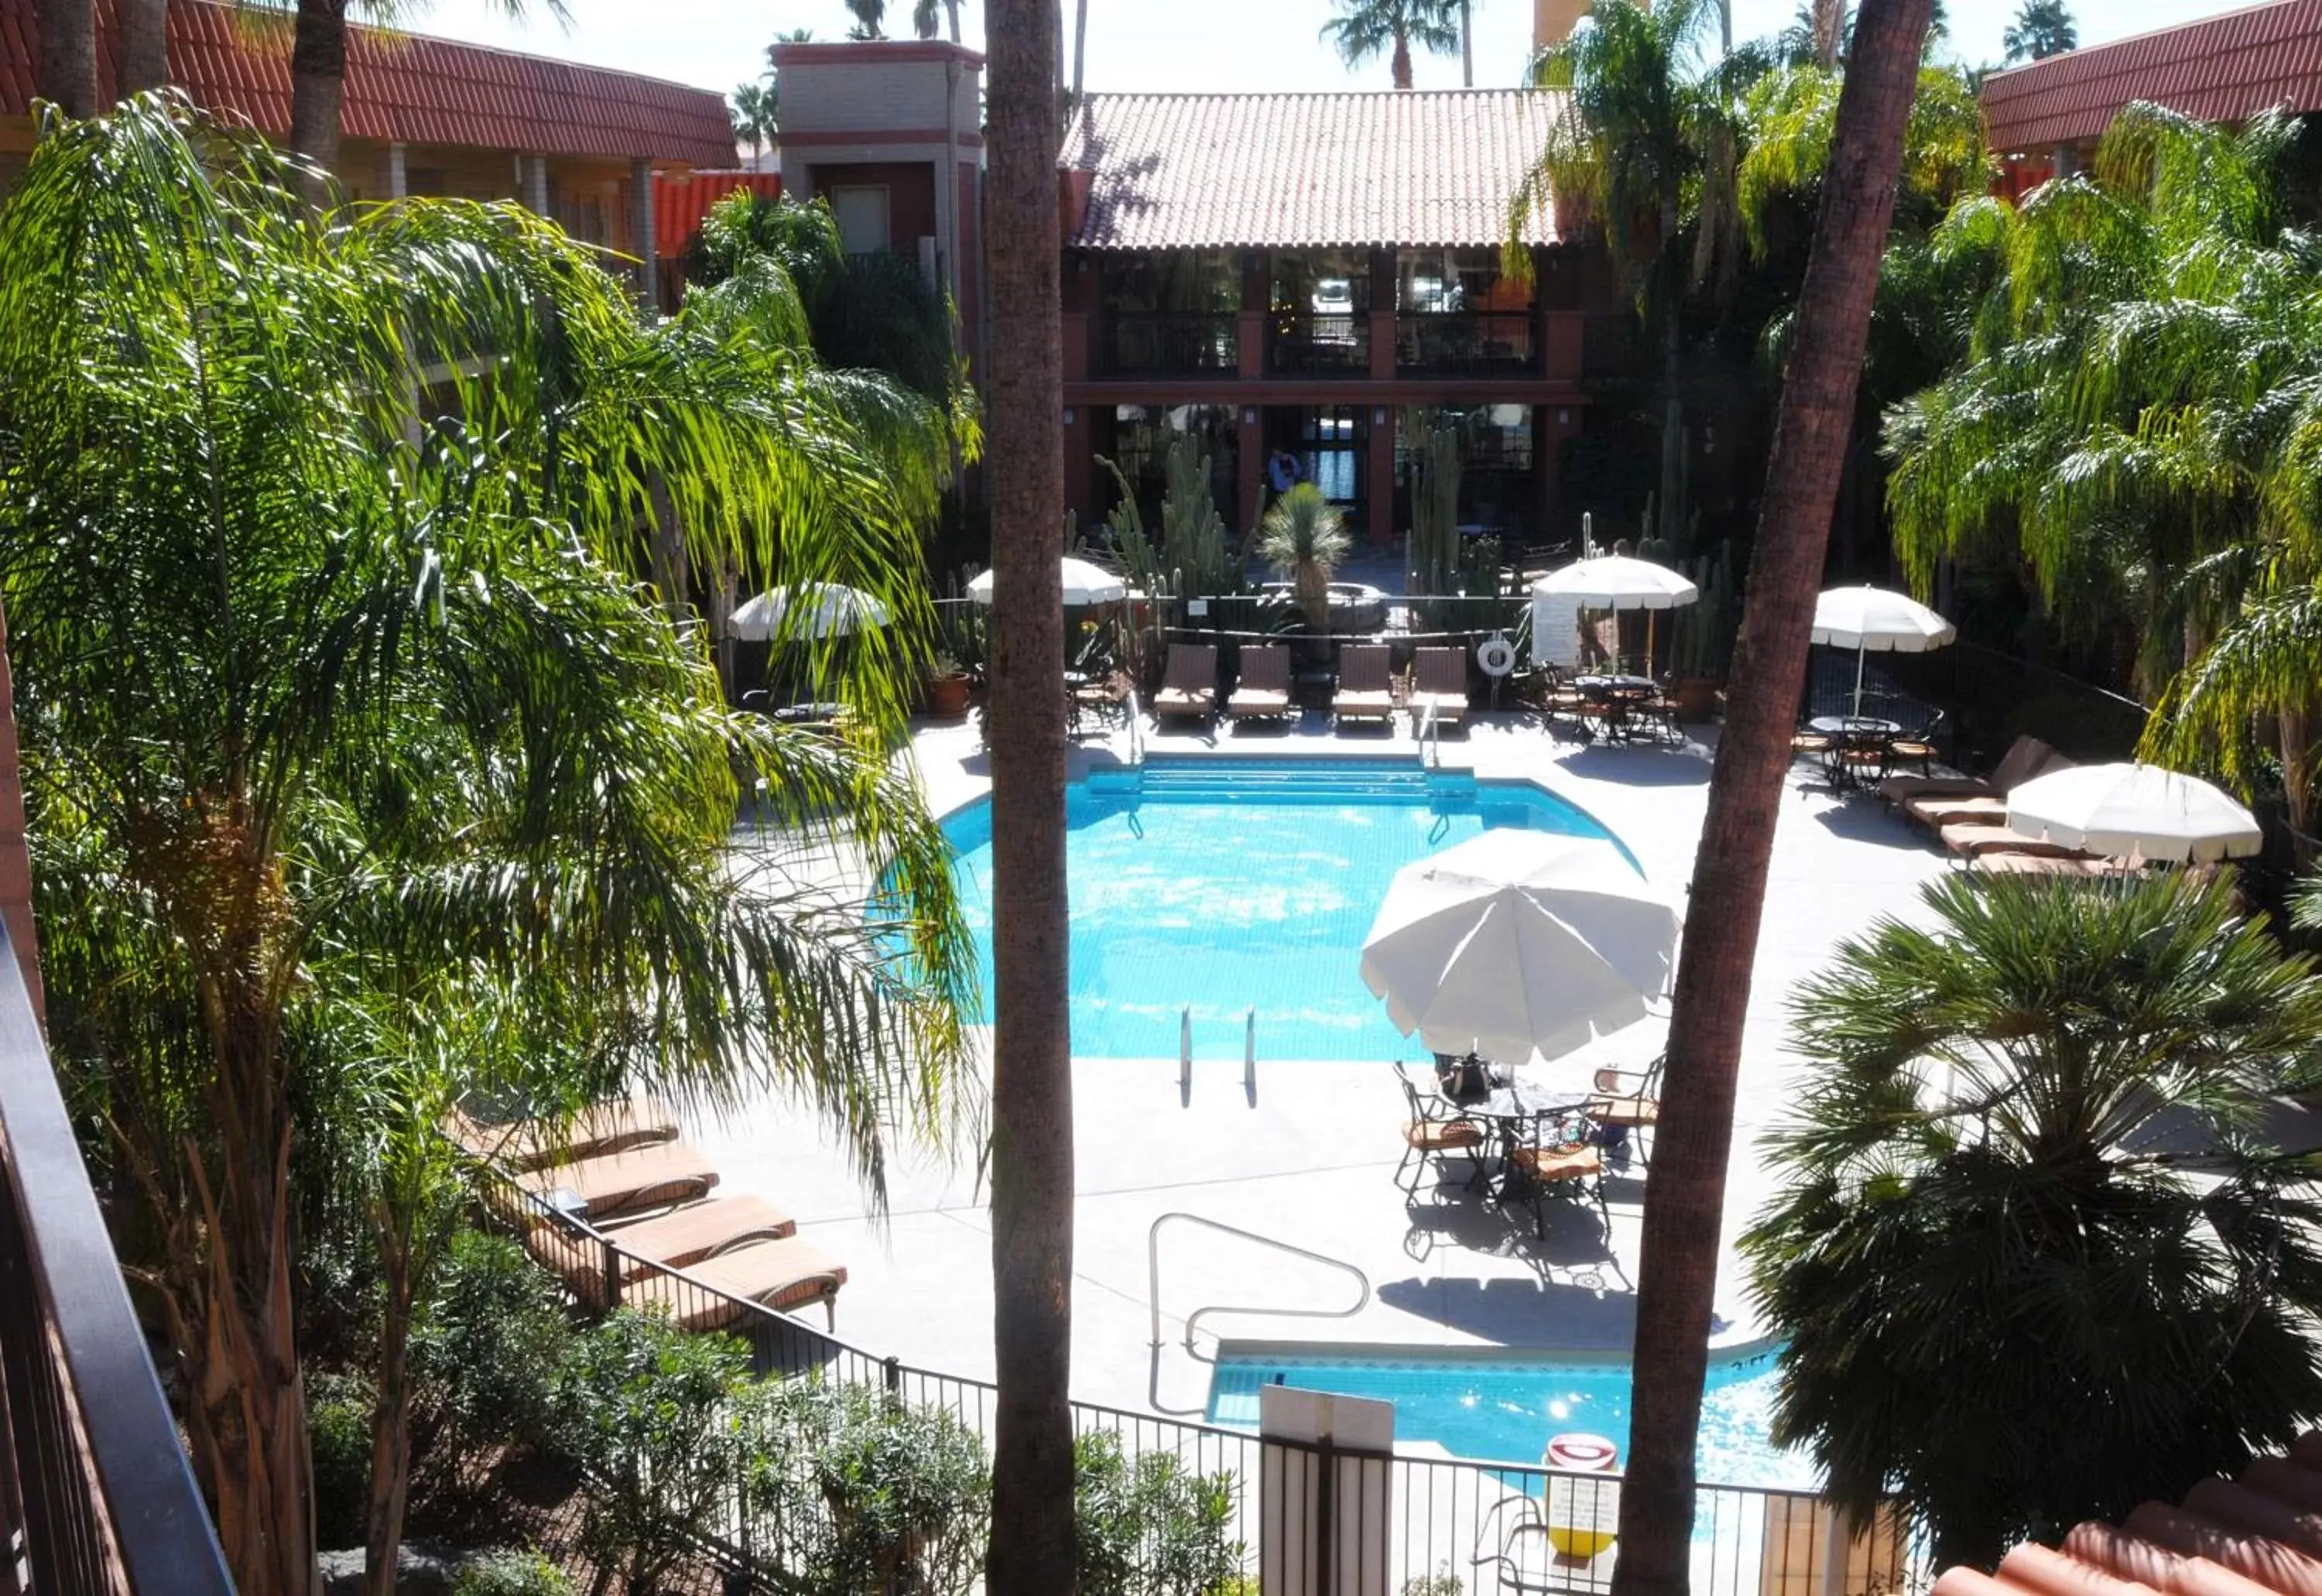 Property building, Pool View in DoubleTree Suites by Hilton Tucson-Williams Center